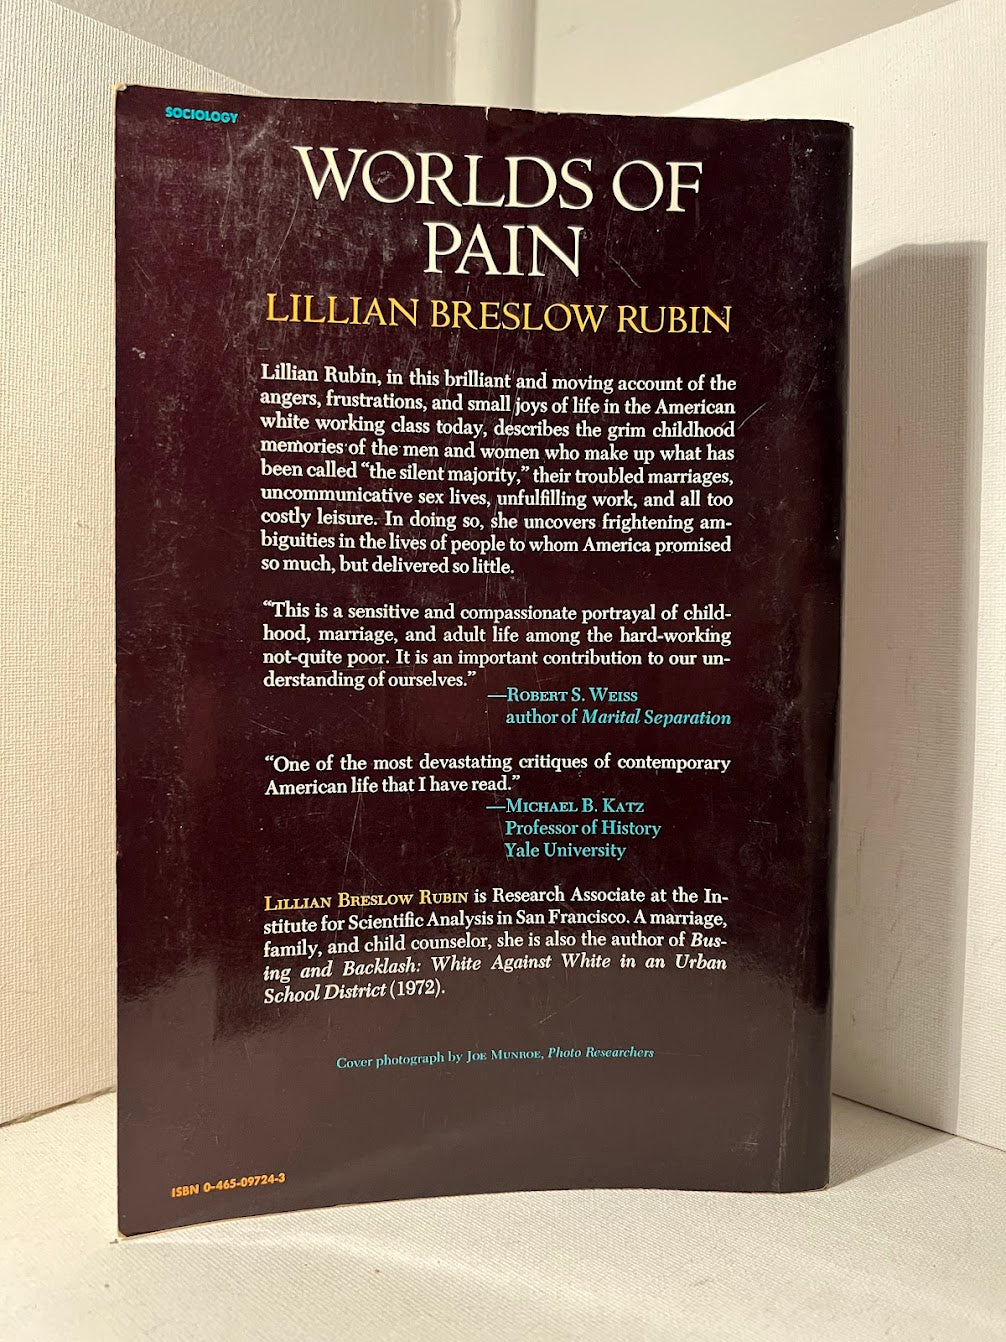 Worlds of Pain: Life in the Working Class Family by Lillian Breslow Rubin